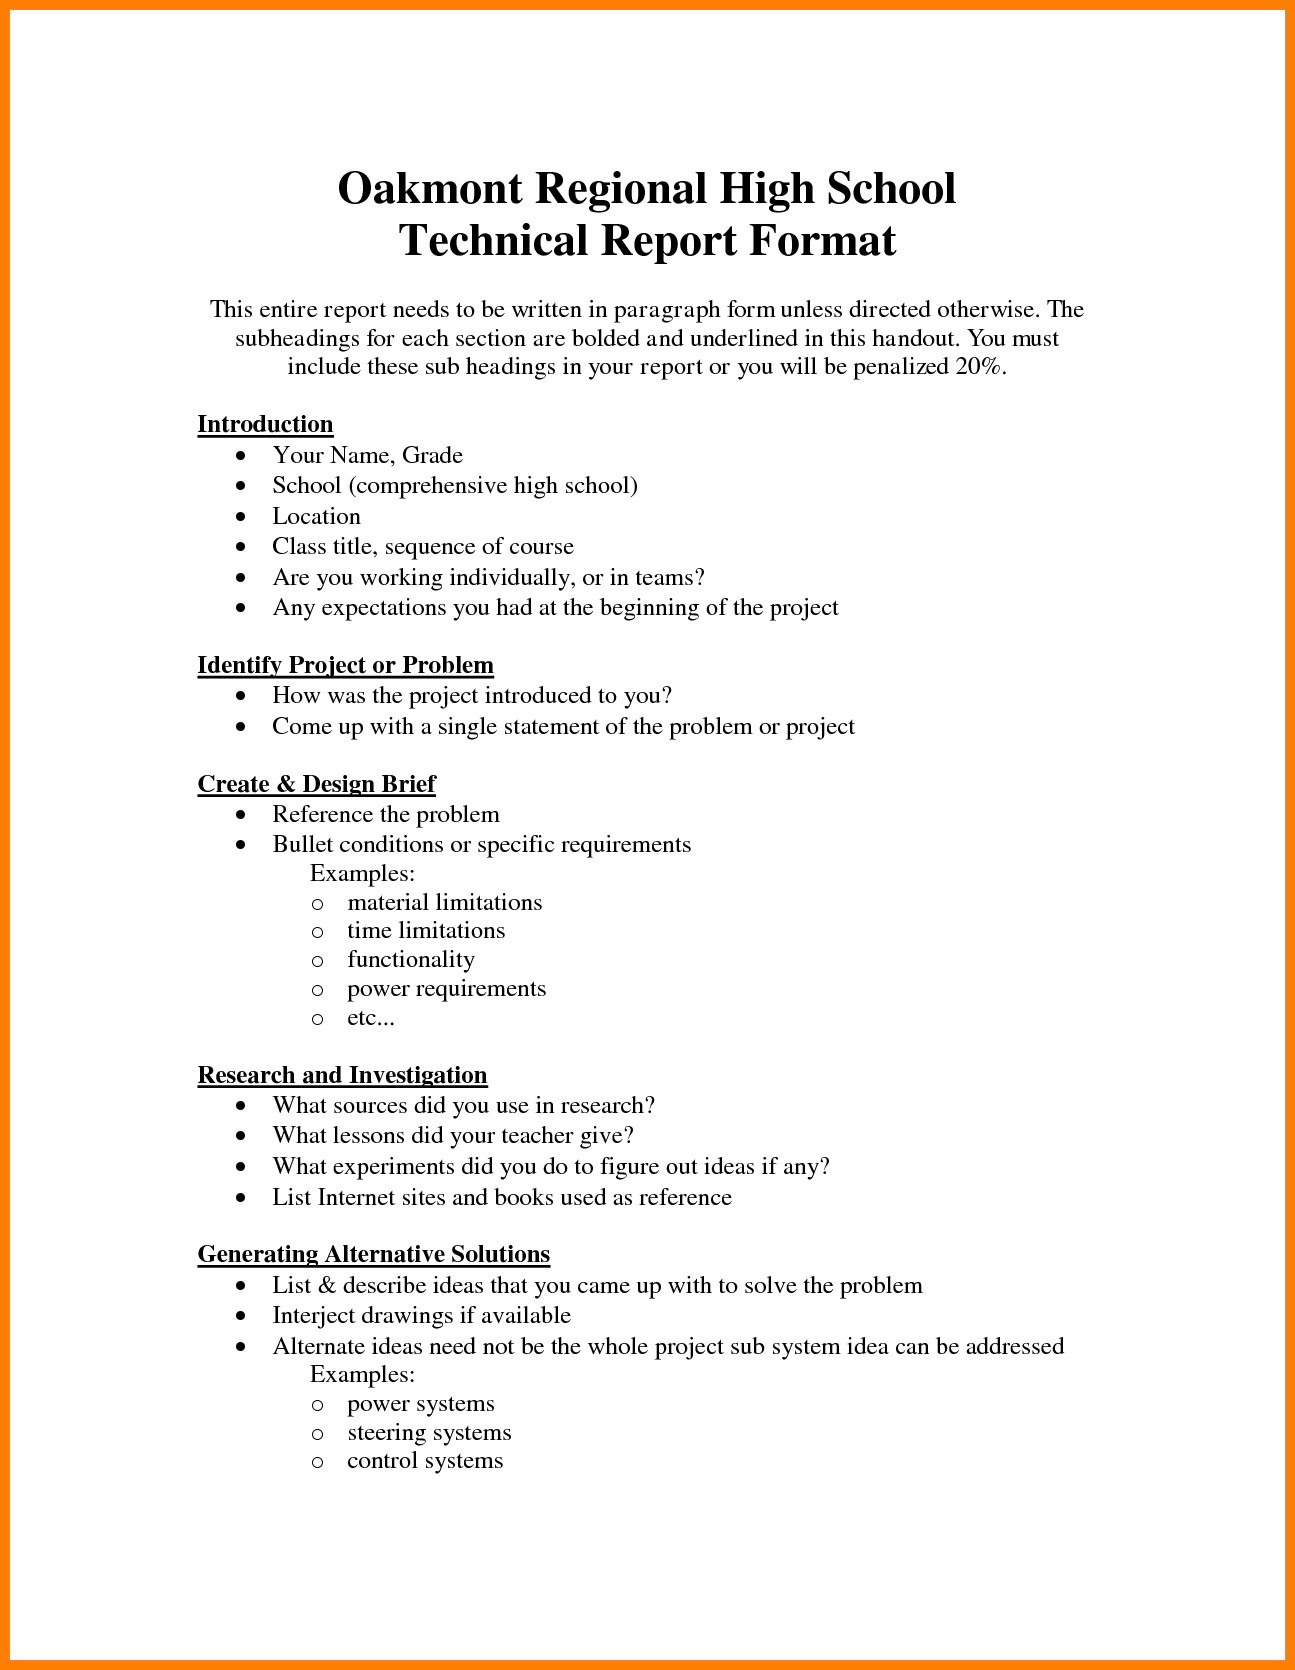 Technical Report Formats  Sansurabionetassociats intended for Technical Report Template Latex